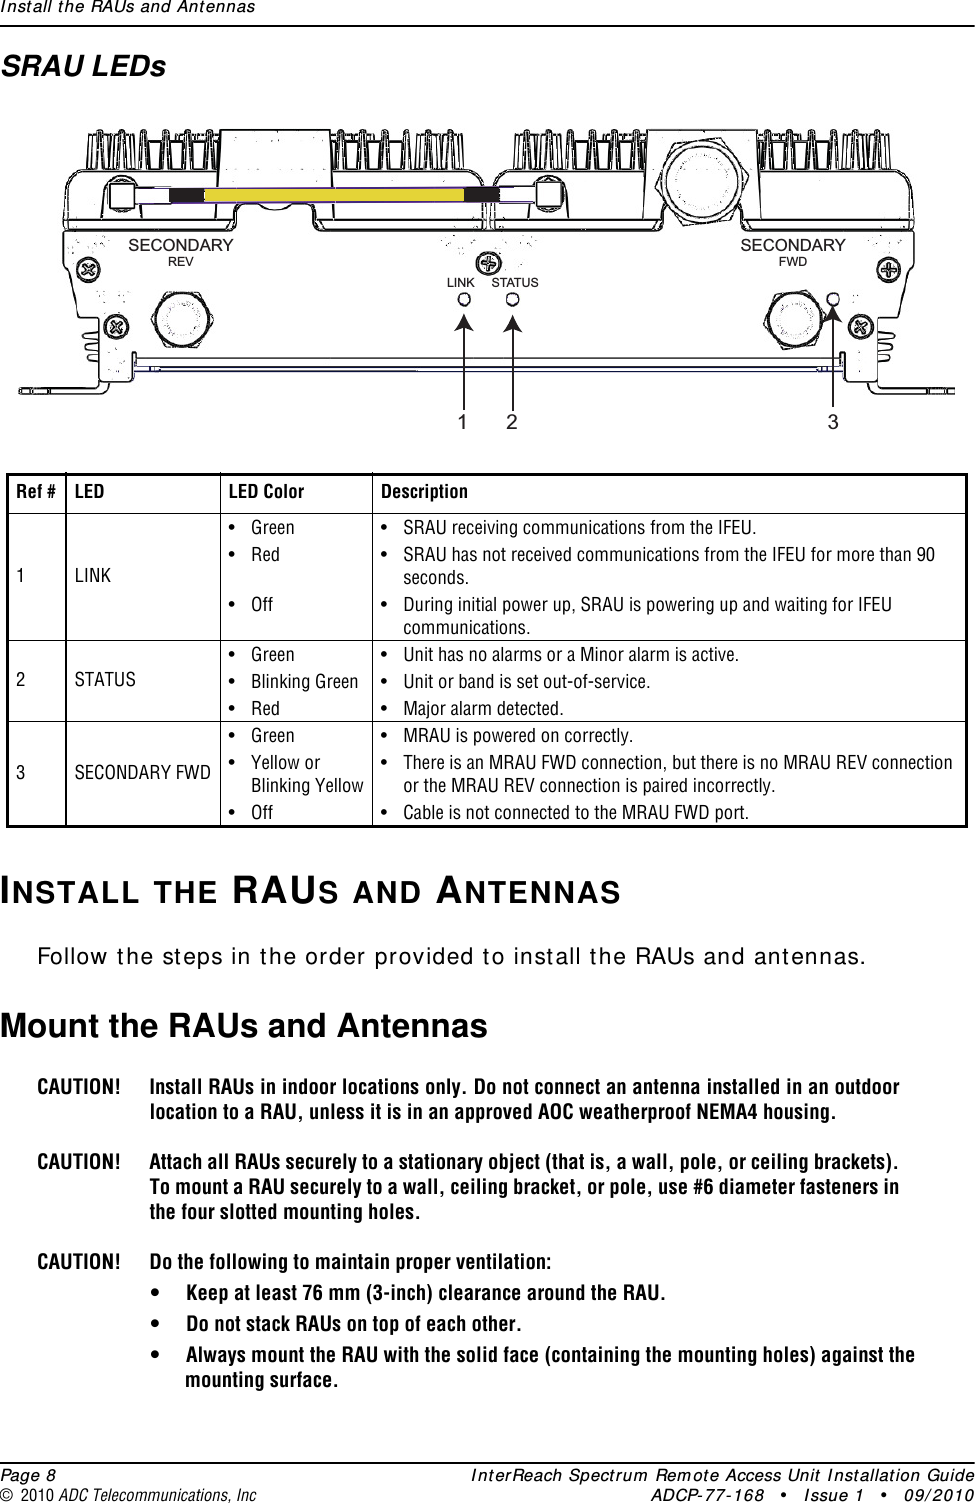 Install the RAUs and Antennas  Page 8 InterReach Spectrum Remote Access Unit Installation Guide© 2010 ADC Telecommunications, Inc ADCP-77-168 • Issue 1 • 09/2010SRAU LEDsINSTALL THE RAUS AND ANTENNASFollow the steps in the order provided to install the RAUs and antennas.Mount the RAUs and AntennasCAUTION! Install RAUs in indoor locations only. Do not connect an antenna installed in an outdoor location to a RAU, unless it is in an approved AOC weatherproof NEMA4 housing.CAUTION! Attach all RAUs securely to a stationary object (that is, a wall, pole, or ceiling brackets). To mount a RAU securely to a wall, ceiling bracket, or pole, use #6 diameter fasteners in the four slotted mounting holes.CAUTION! Do the following to maintain proper ventilation:• Keep at least 76 mm (3-inch) clearance around the RAU.• Do not stack RAUs on top of each other.• Always mount the RAU with the solid face (containing the mounting holes) against the mounting surface.Ref # LED LED Color Description1LINK•Green •SRAU receiving communications from the IFEU.• Red • SRAU has not received communications from the IFEU for more than 90 seconds.• Off • During initial power up, SRAU is powering up and waiting for IFEU communications.2STATUS• Green • Unit has no alarms or a Minor alarm is active.• Blinking Green • Unit or band is set out-of-service.• Red • Major alarm detected.3SECONDARY FWD• Green • MRAU is powered on correctly.•Yellow orBlinking Yellow• There is an MRAU FWD connection, but there is no MRAU REV connection or the MRAU REV connection is paired incorrectly.• Off • Cable is not connected to the MRAU FWD port.LINK STATUSSECONDARYREVSECONDARYFWD21 3